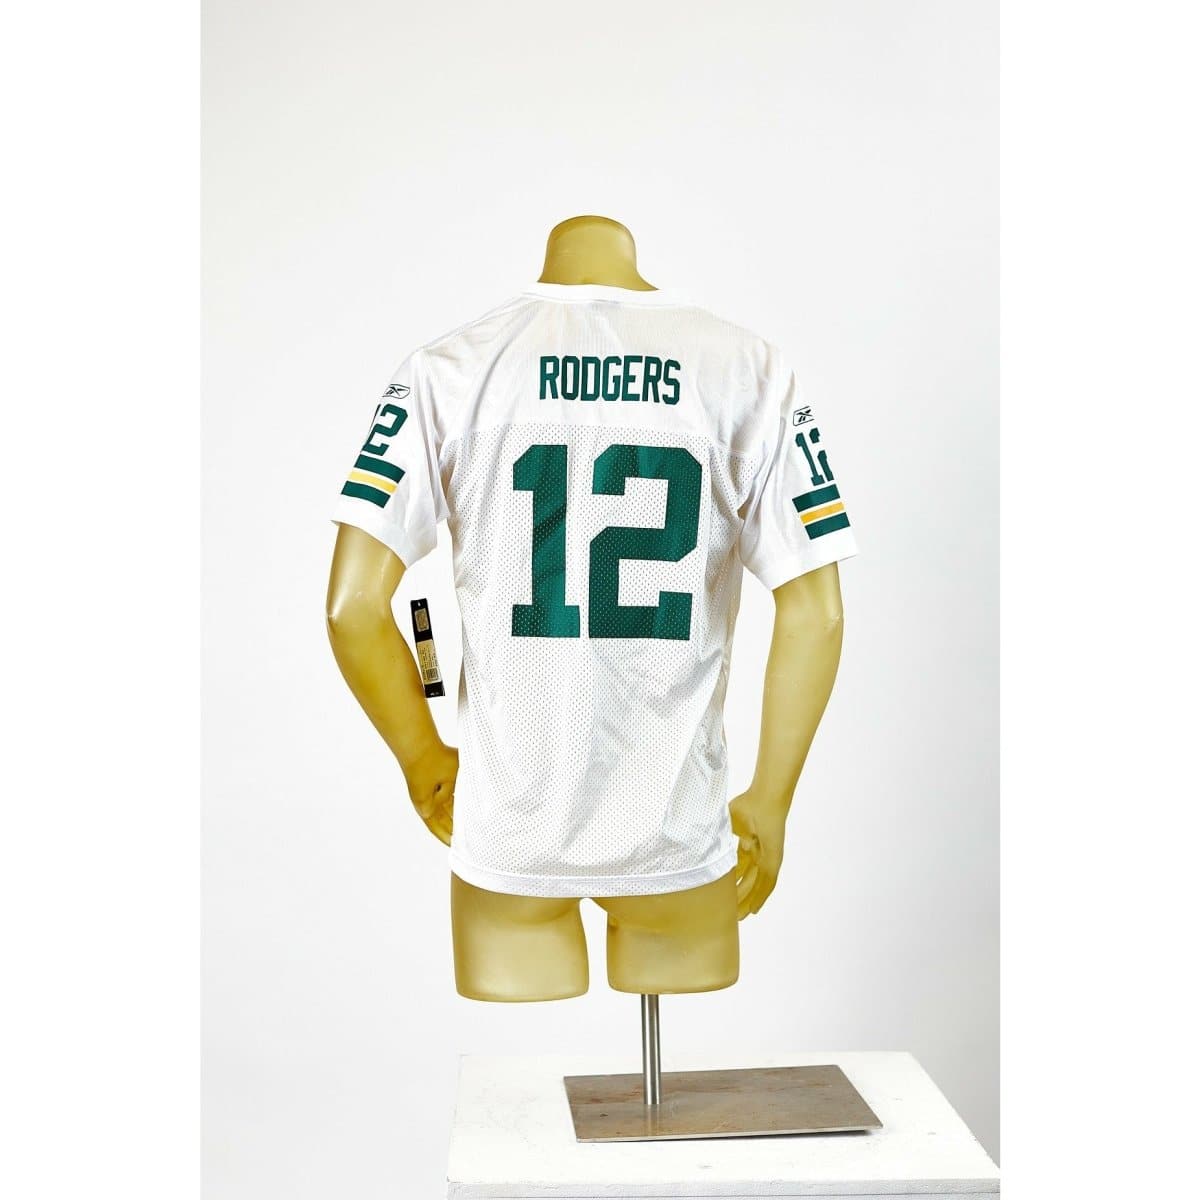 Gameday Grails Jersey Large Vintage Green Bay Packers Aaron Rodgers Jersey